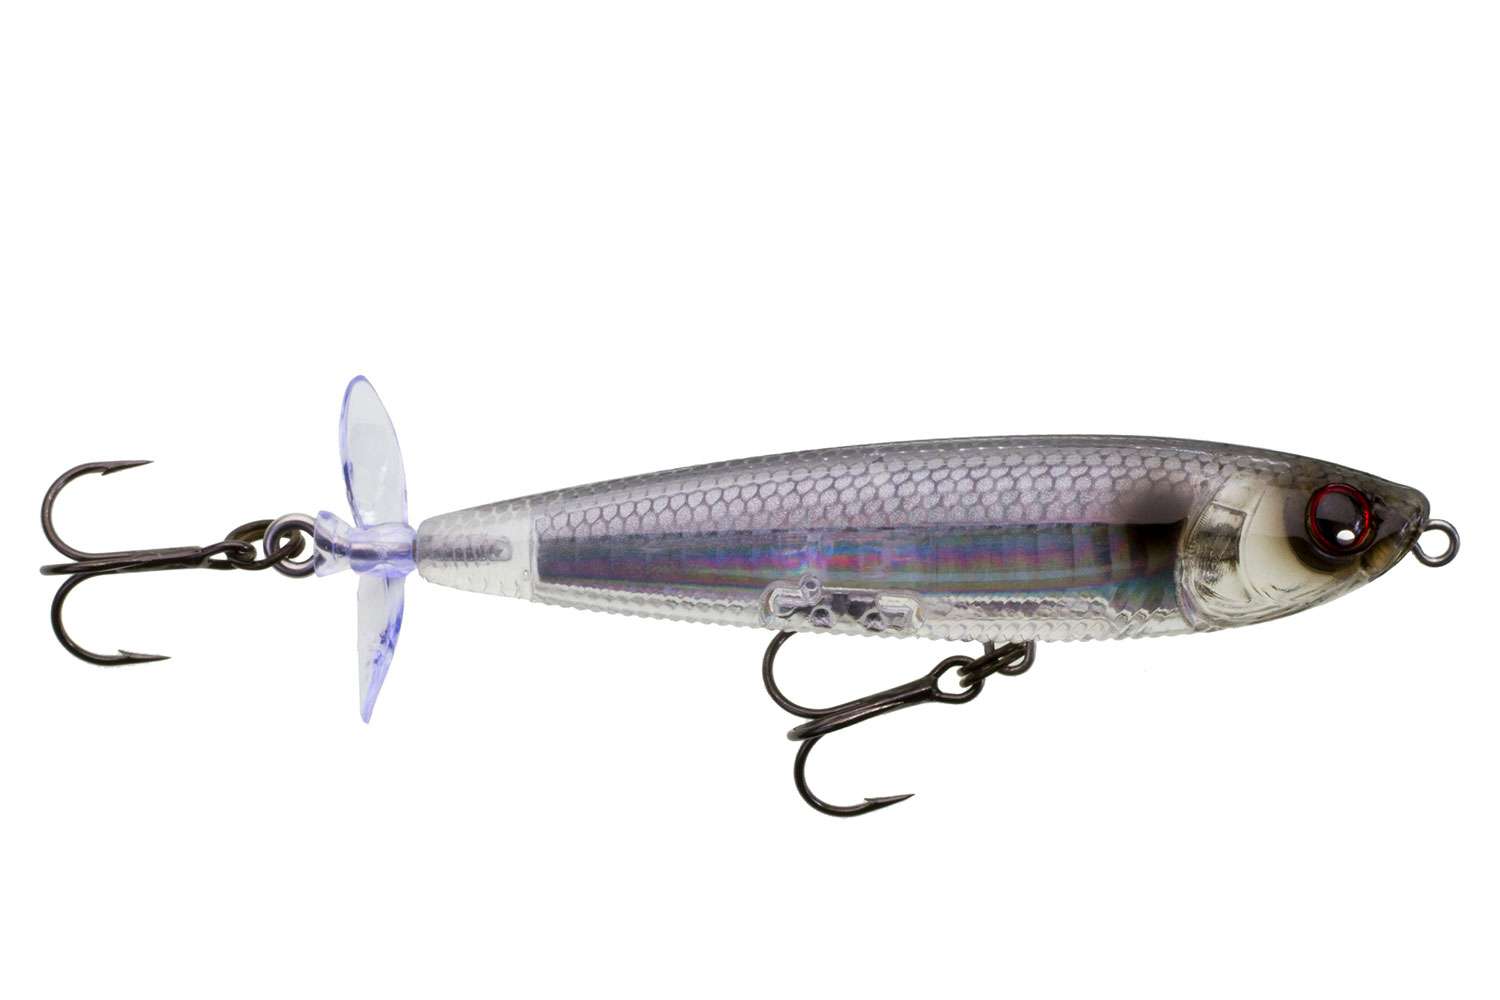 4. For bream beds throughout the country, and for southern tidal fisheries where the bass diet includes needlefish, Card likes the Yo-Zuri 3DB Prop. As he notes, this bait features a single UV plastic prop on its aft, rather than the common design with metal props on the nose and tail.</p>

<p>Card said this creates a more subtle presentation that allows him to get bit in crowded areas where fishing behind others is a constant reality. A twitch-twitch-pause cadence makes a good baseline, but he may have to go more aggressive to trigger feeding fish or slow down and let the bait sit in their face.